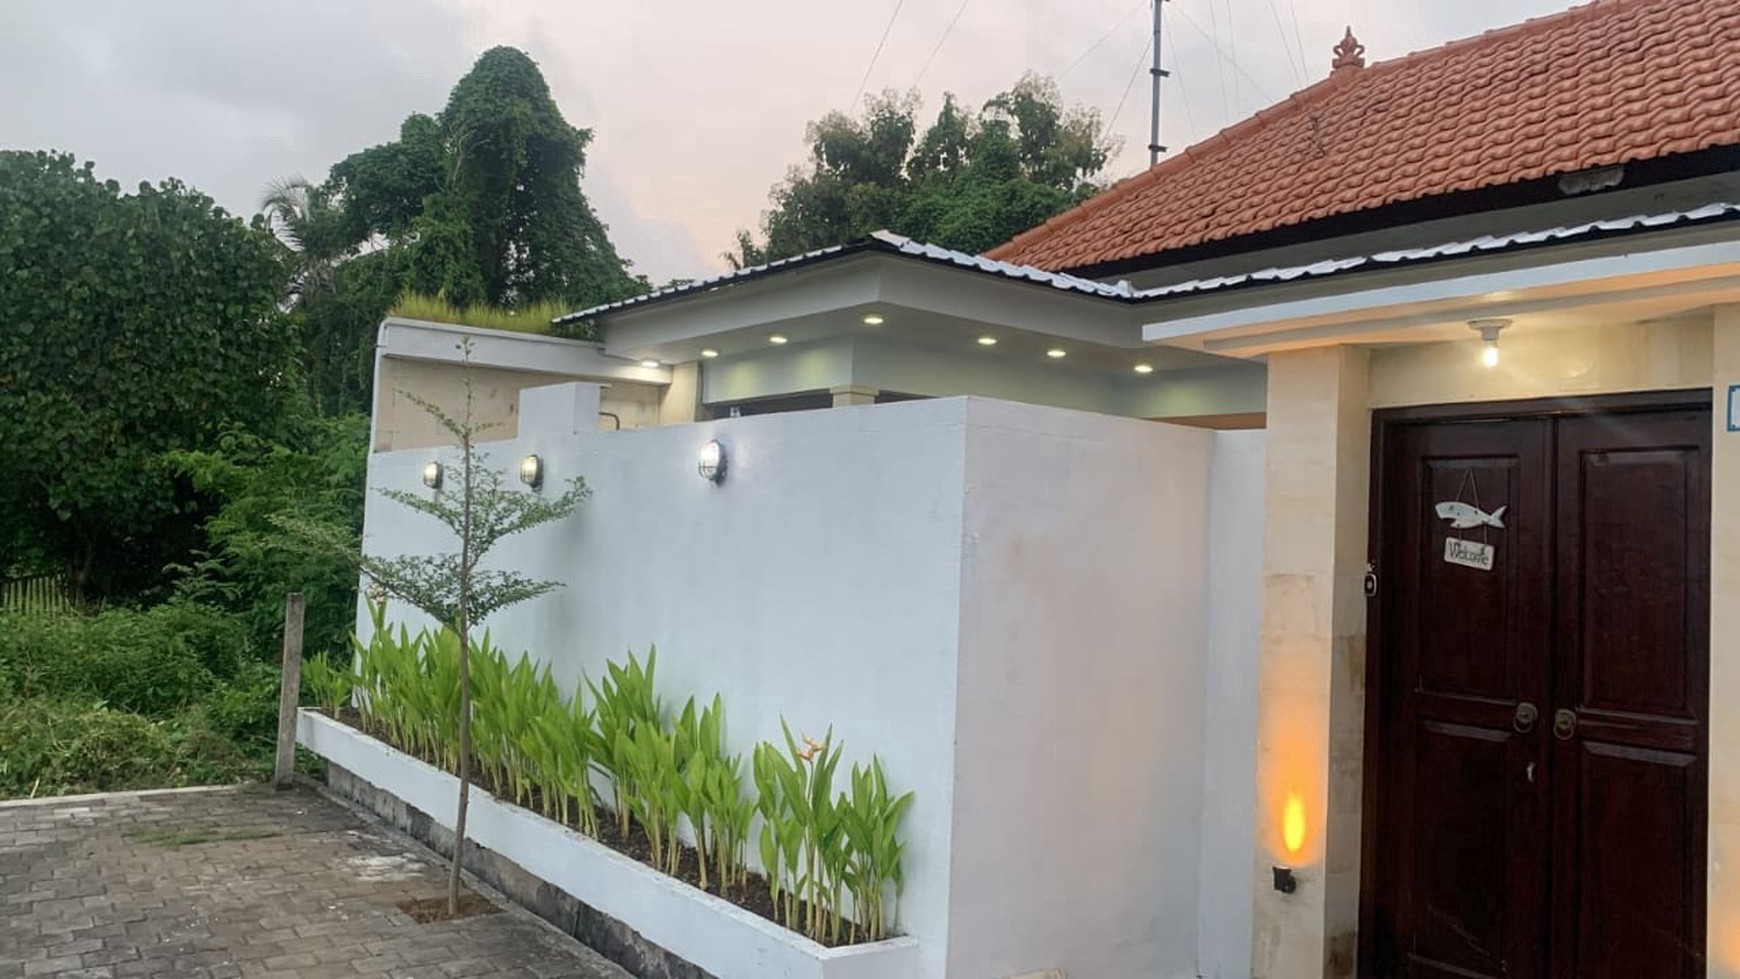 For Rent Yearly - Brand new minimalis modern villa with rice field view in Canggu